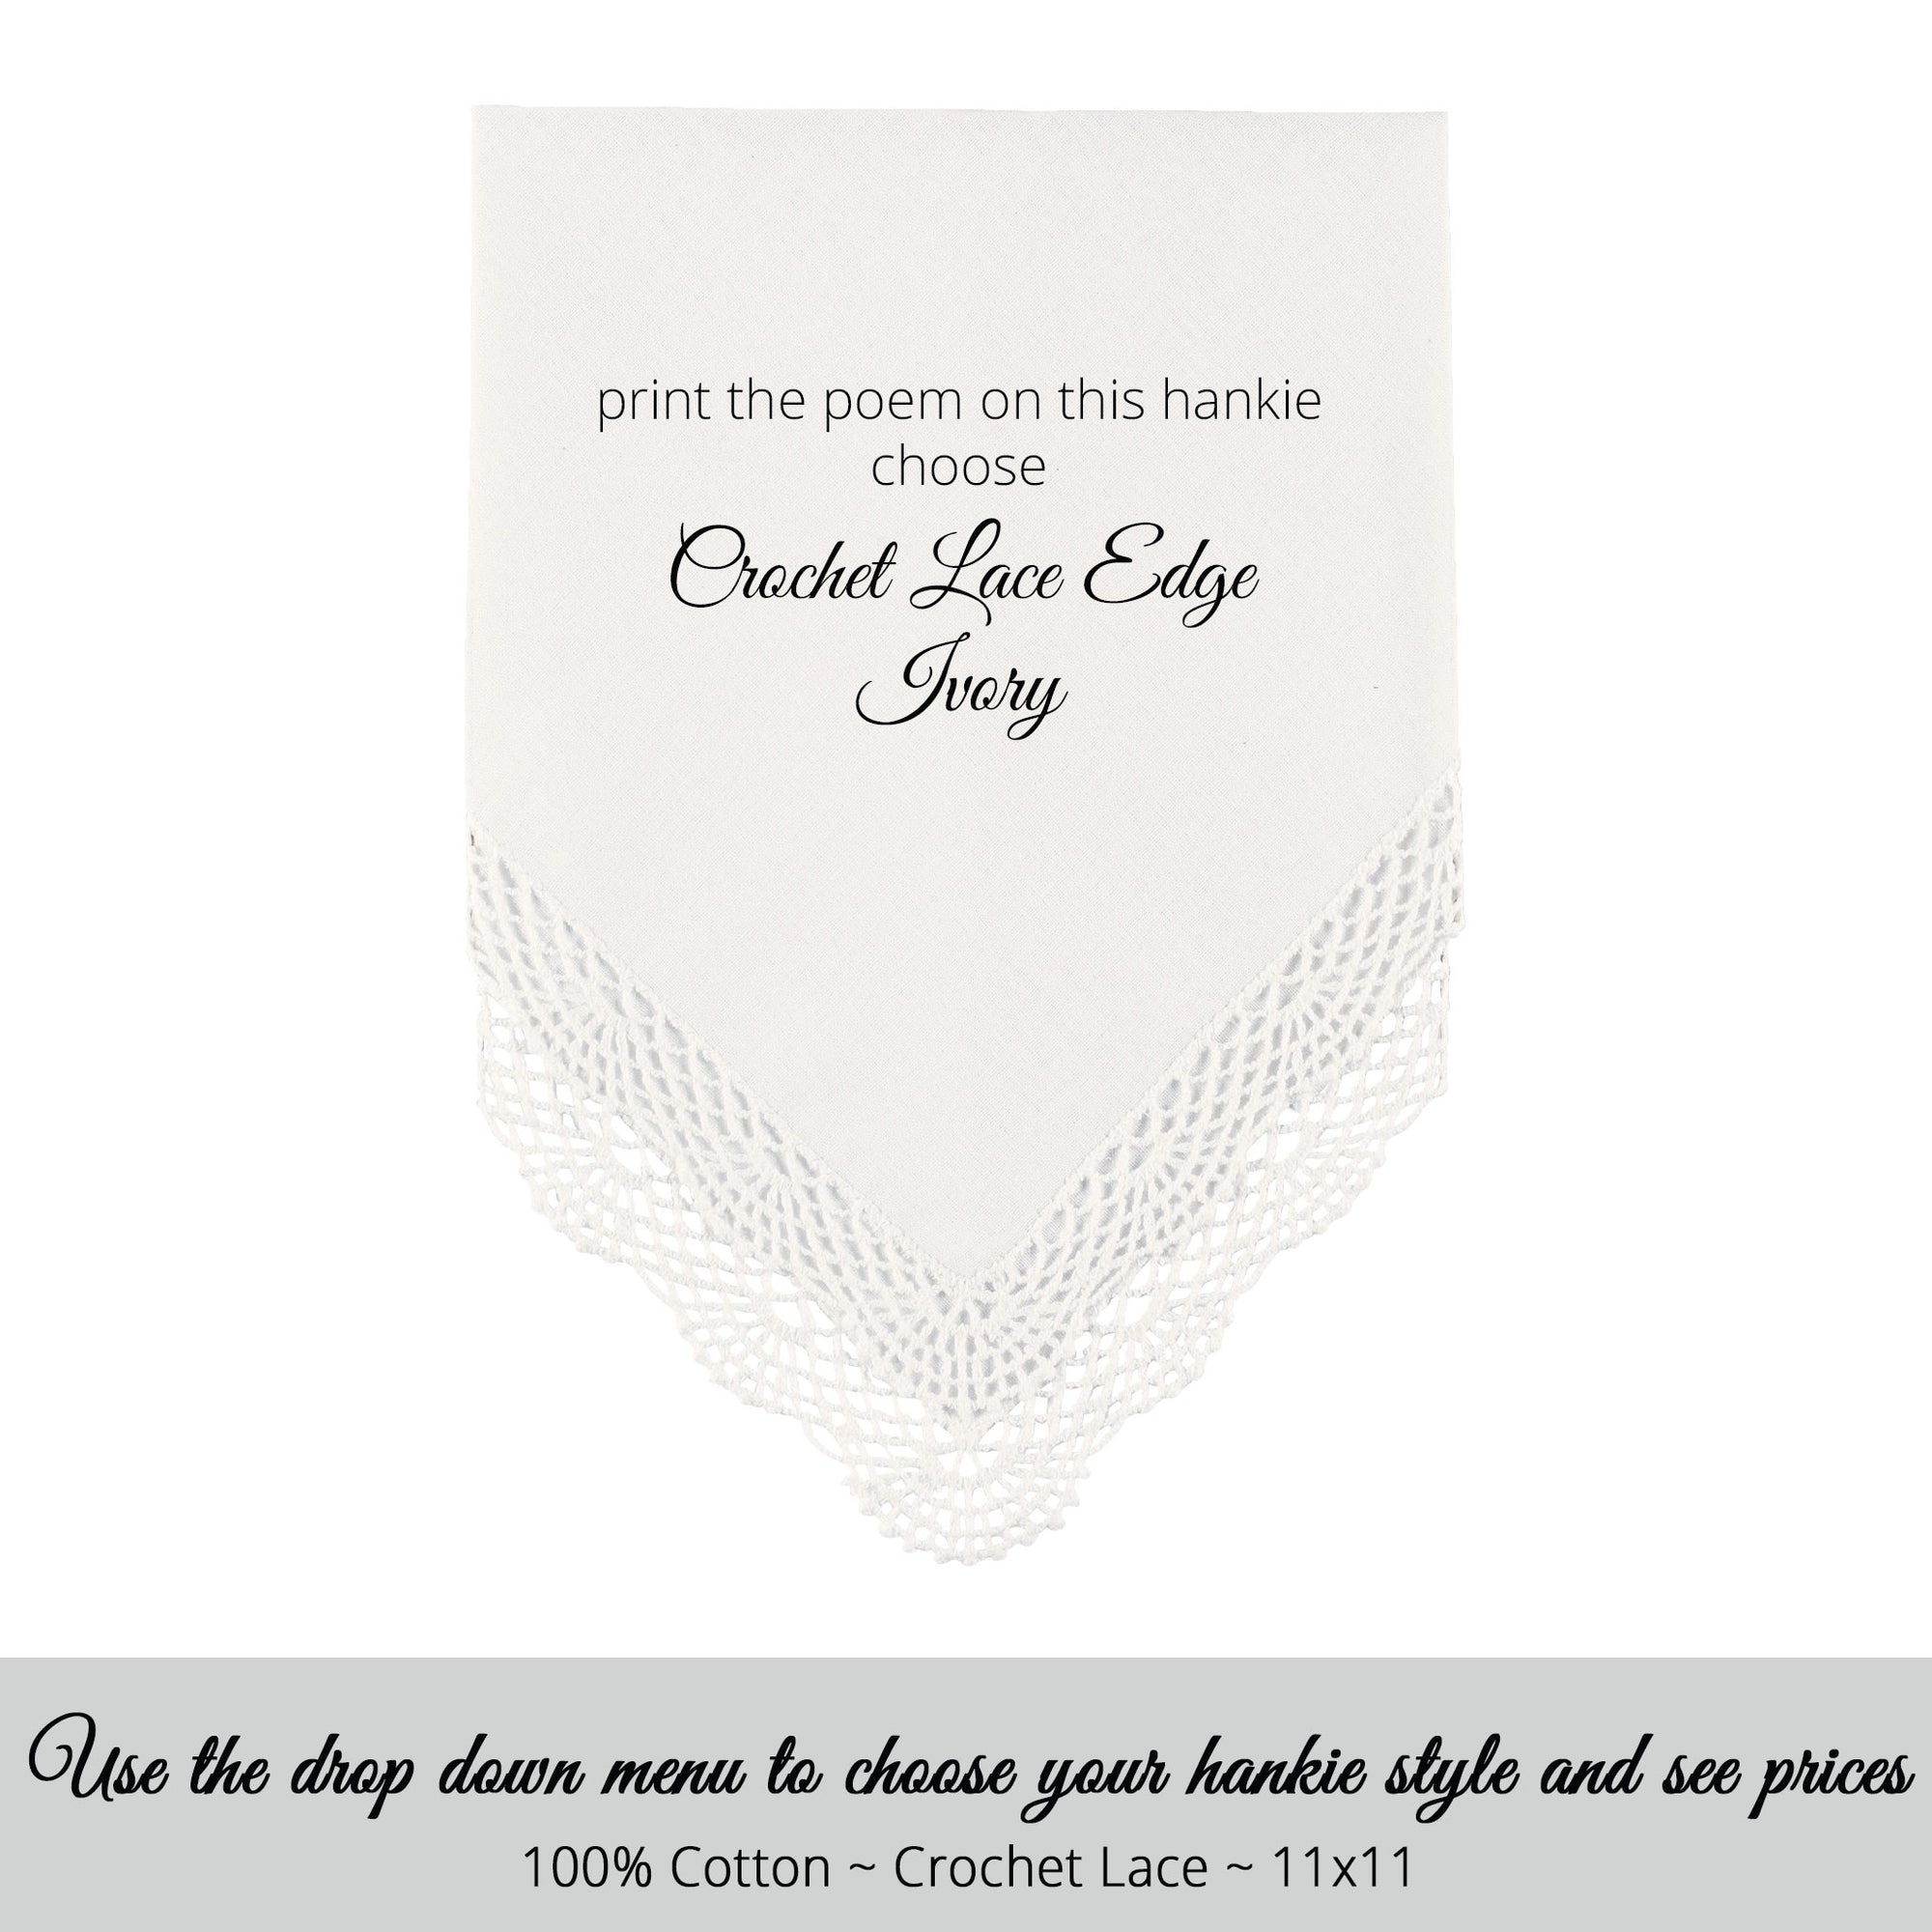 Wedding handkerchief ivory with crochet lace edge for the parents of the groom poem printed hankie